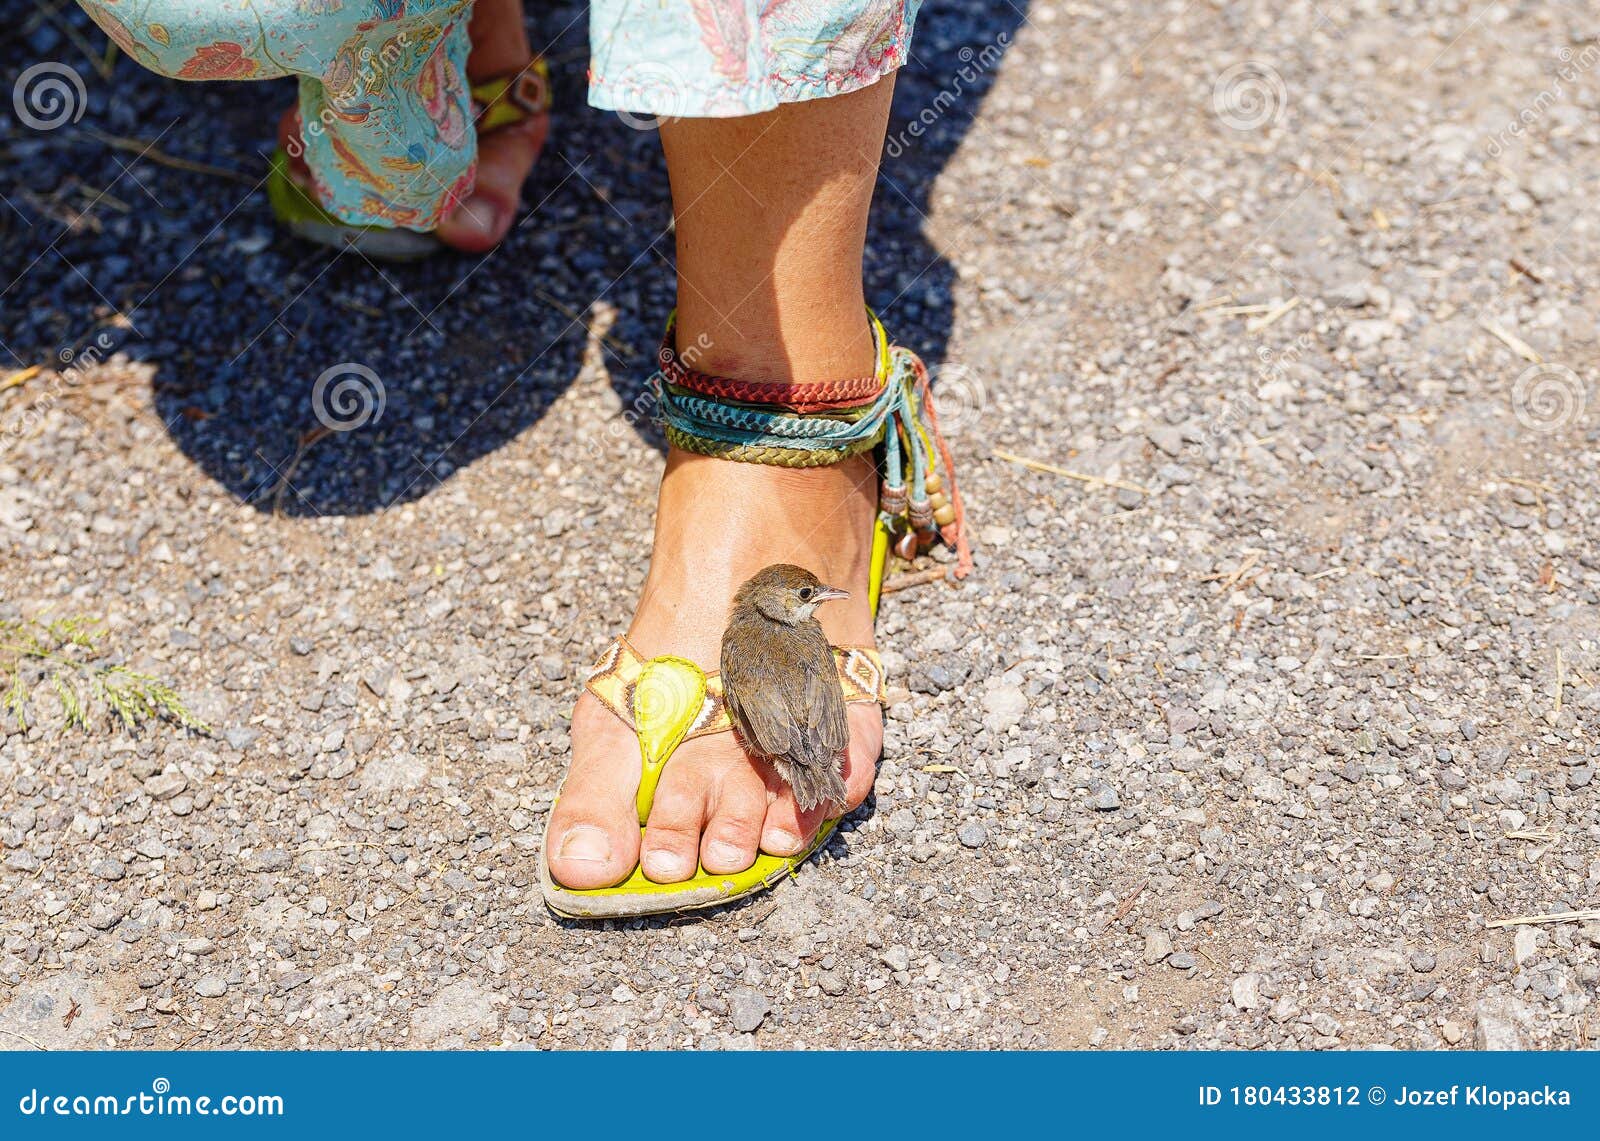 Woman Stands In Sandals On The Road And 